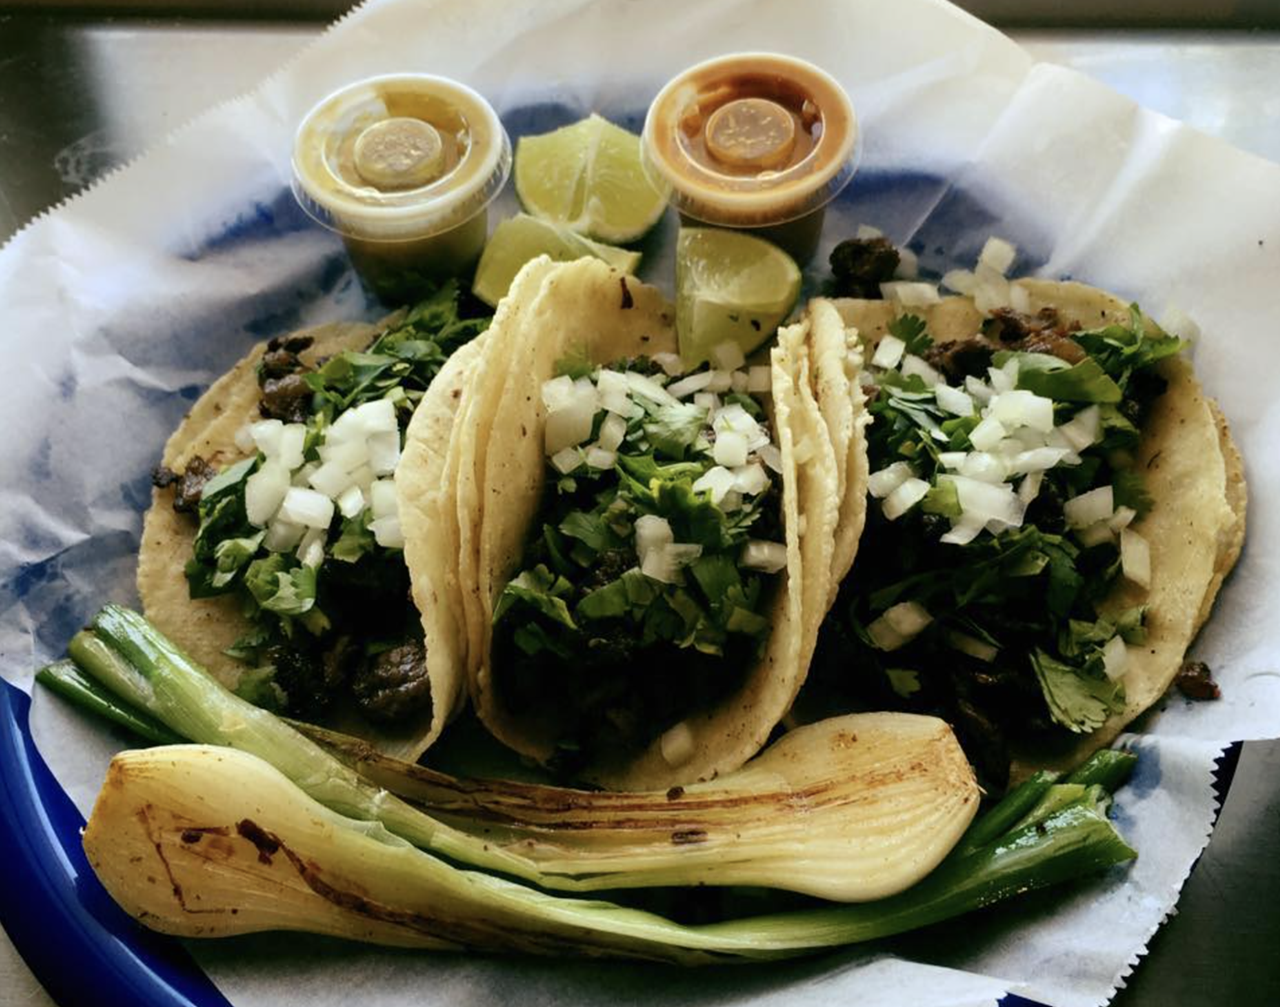 Taquería El Nopal 
8307 N Dale Mabry Hwy., Tampa
This food truck is where it's at. You can get tacos with typical fillings like carne asada and carnitas, but they also offer more rare finds like cabeza and nopales. The taqueria also offers seating so guests can enjoy their perfectly cheesy quesadilla in the shade. 
Photo via Taquería El Nopal /Facebook